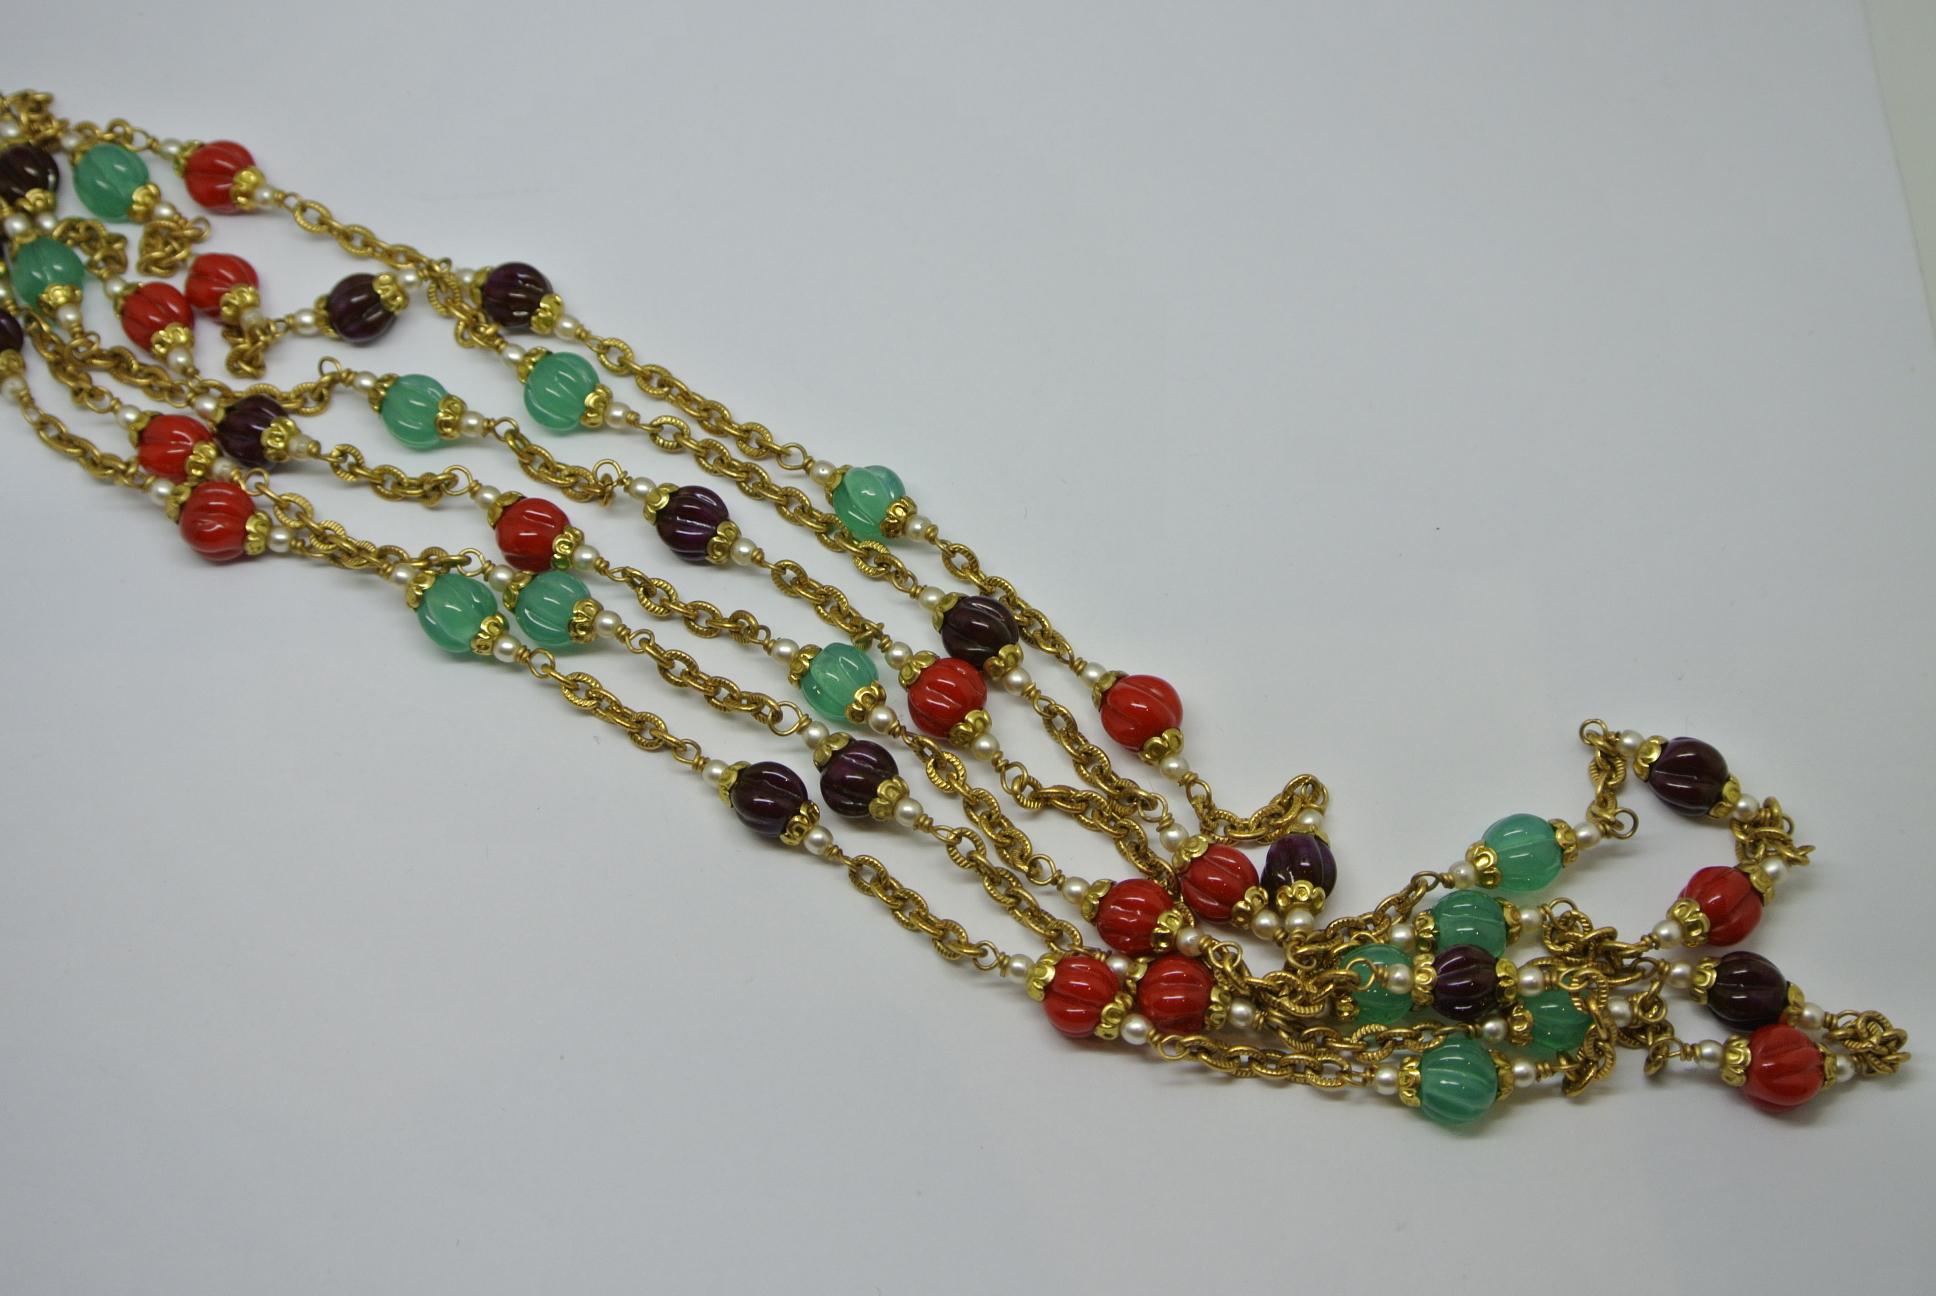 Chanel 1980s Red Green Melon-Cut Gripoix Poured Glass Long Chain Necklace For Sale 2